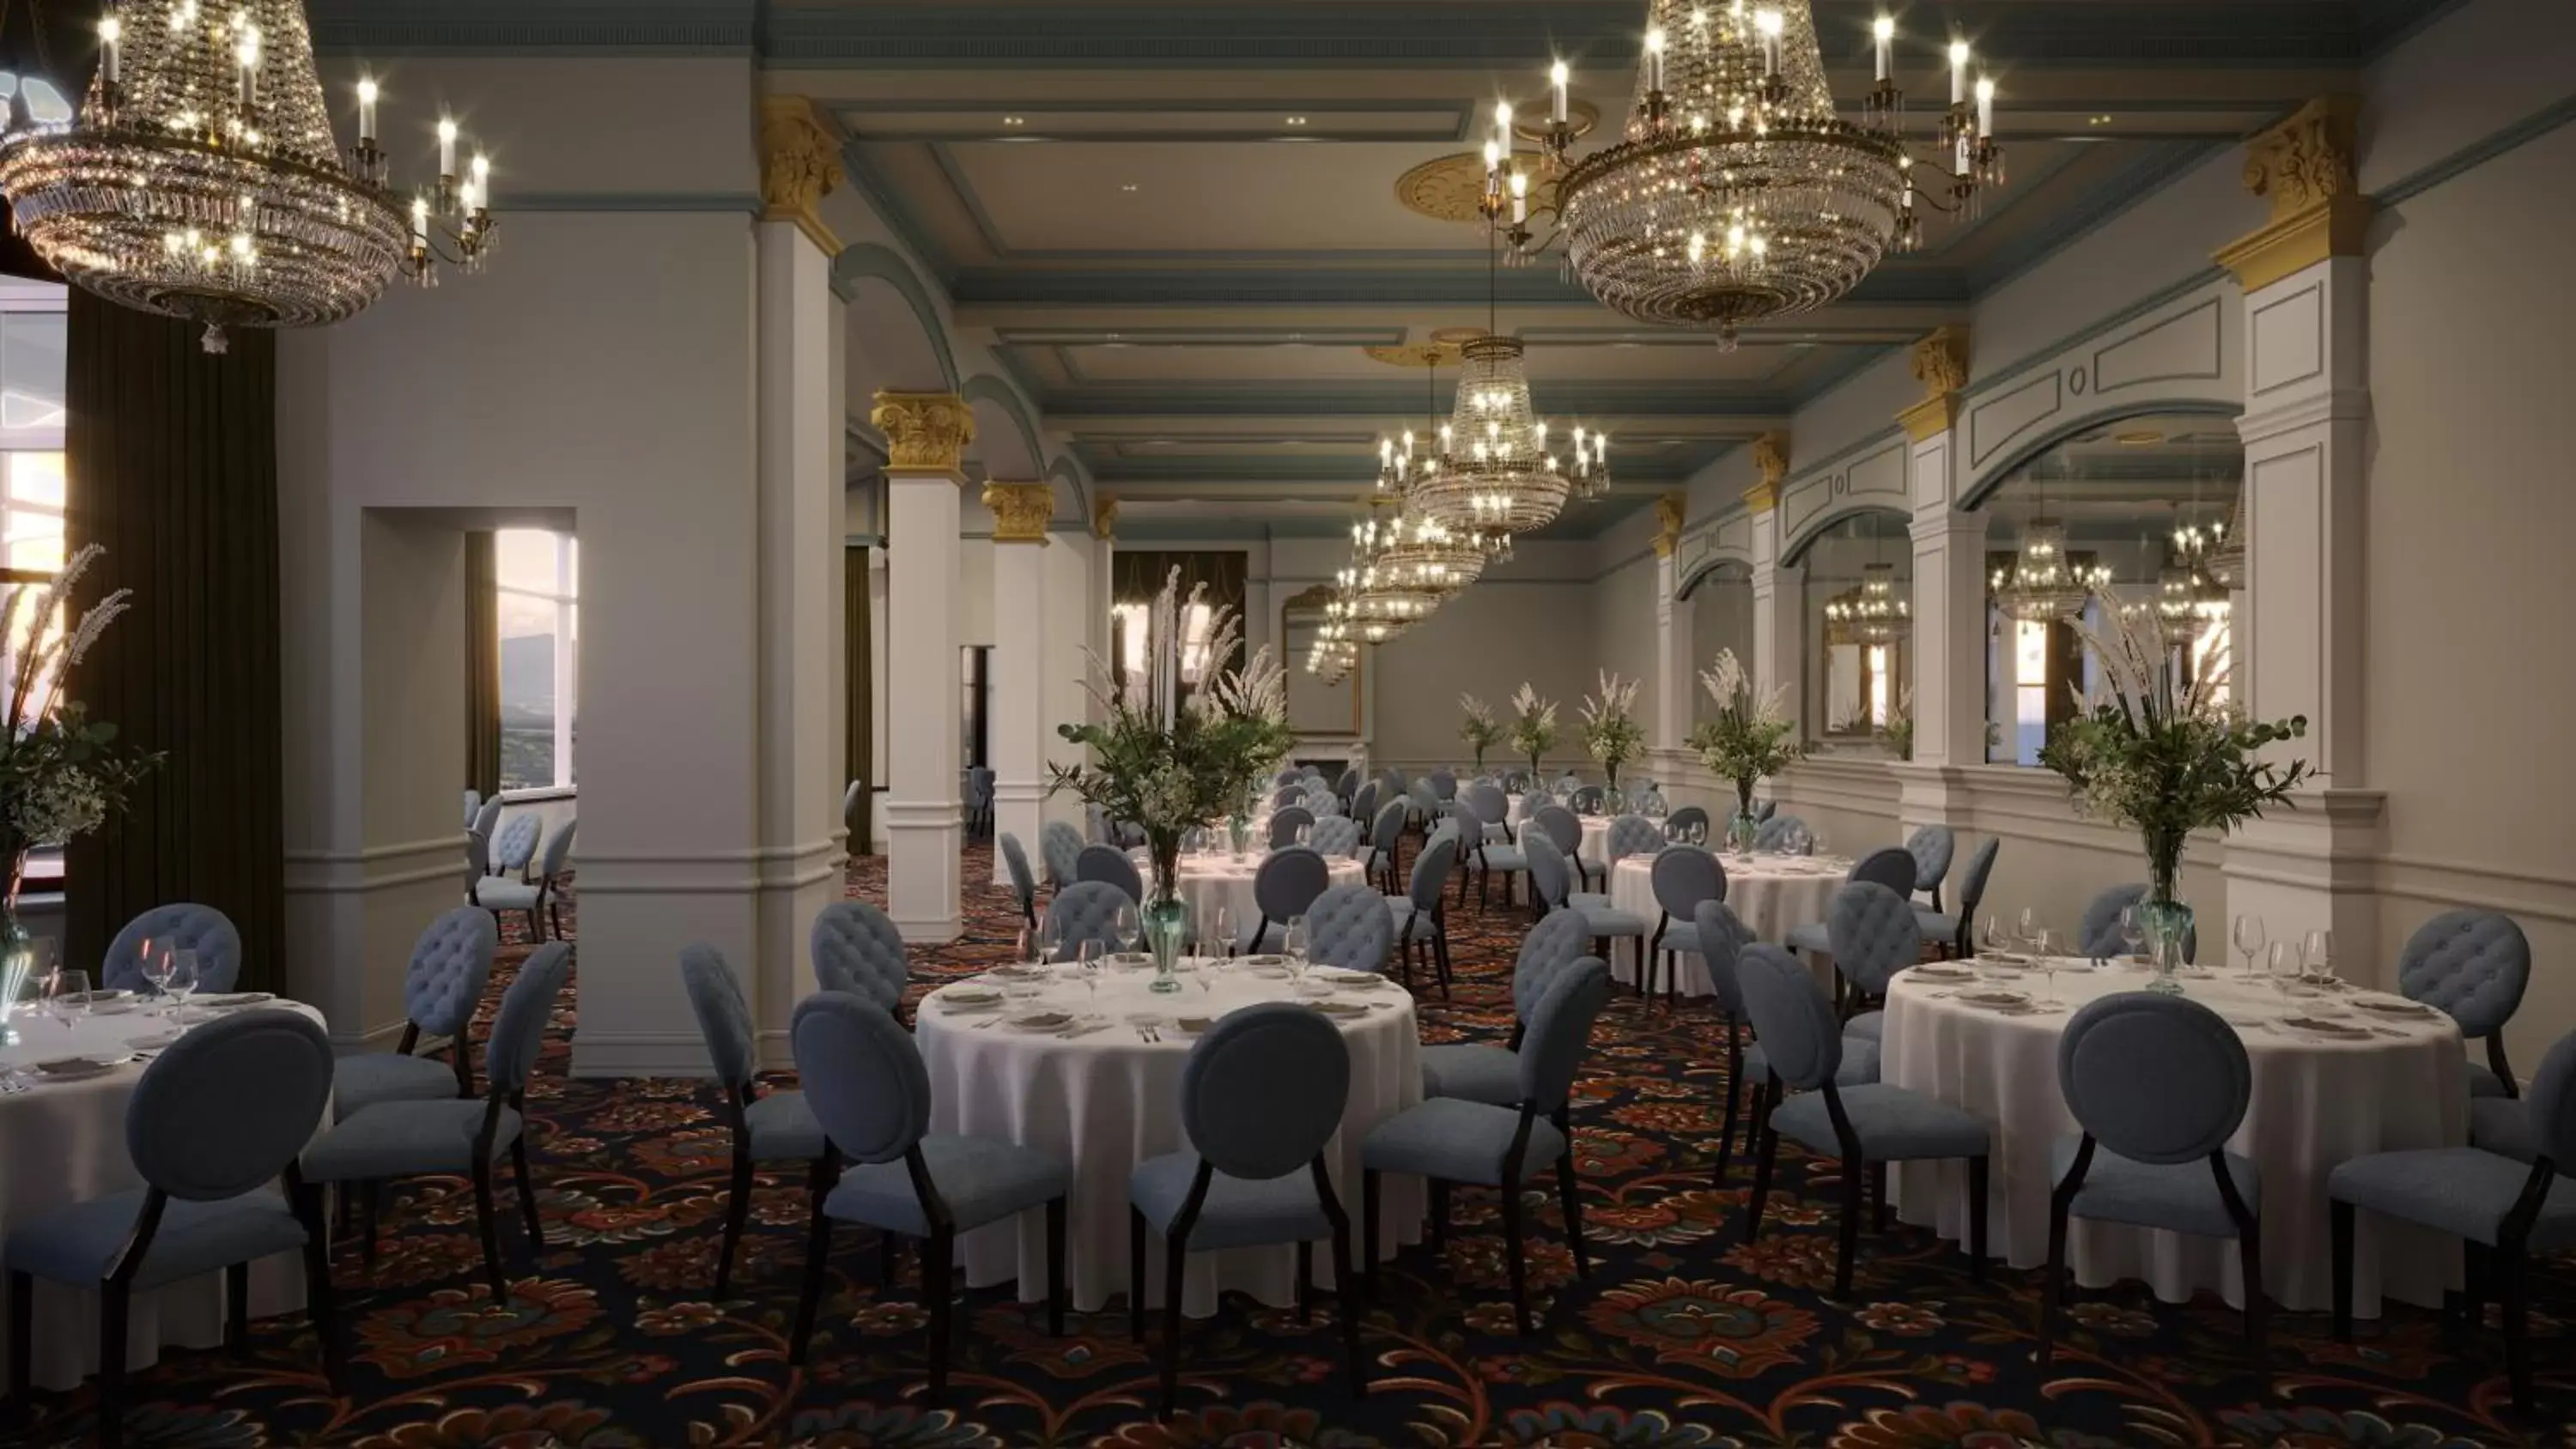 Meeting/conference room, Banquet Facilities in Slieve Donard